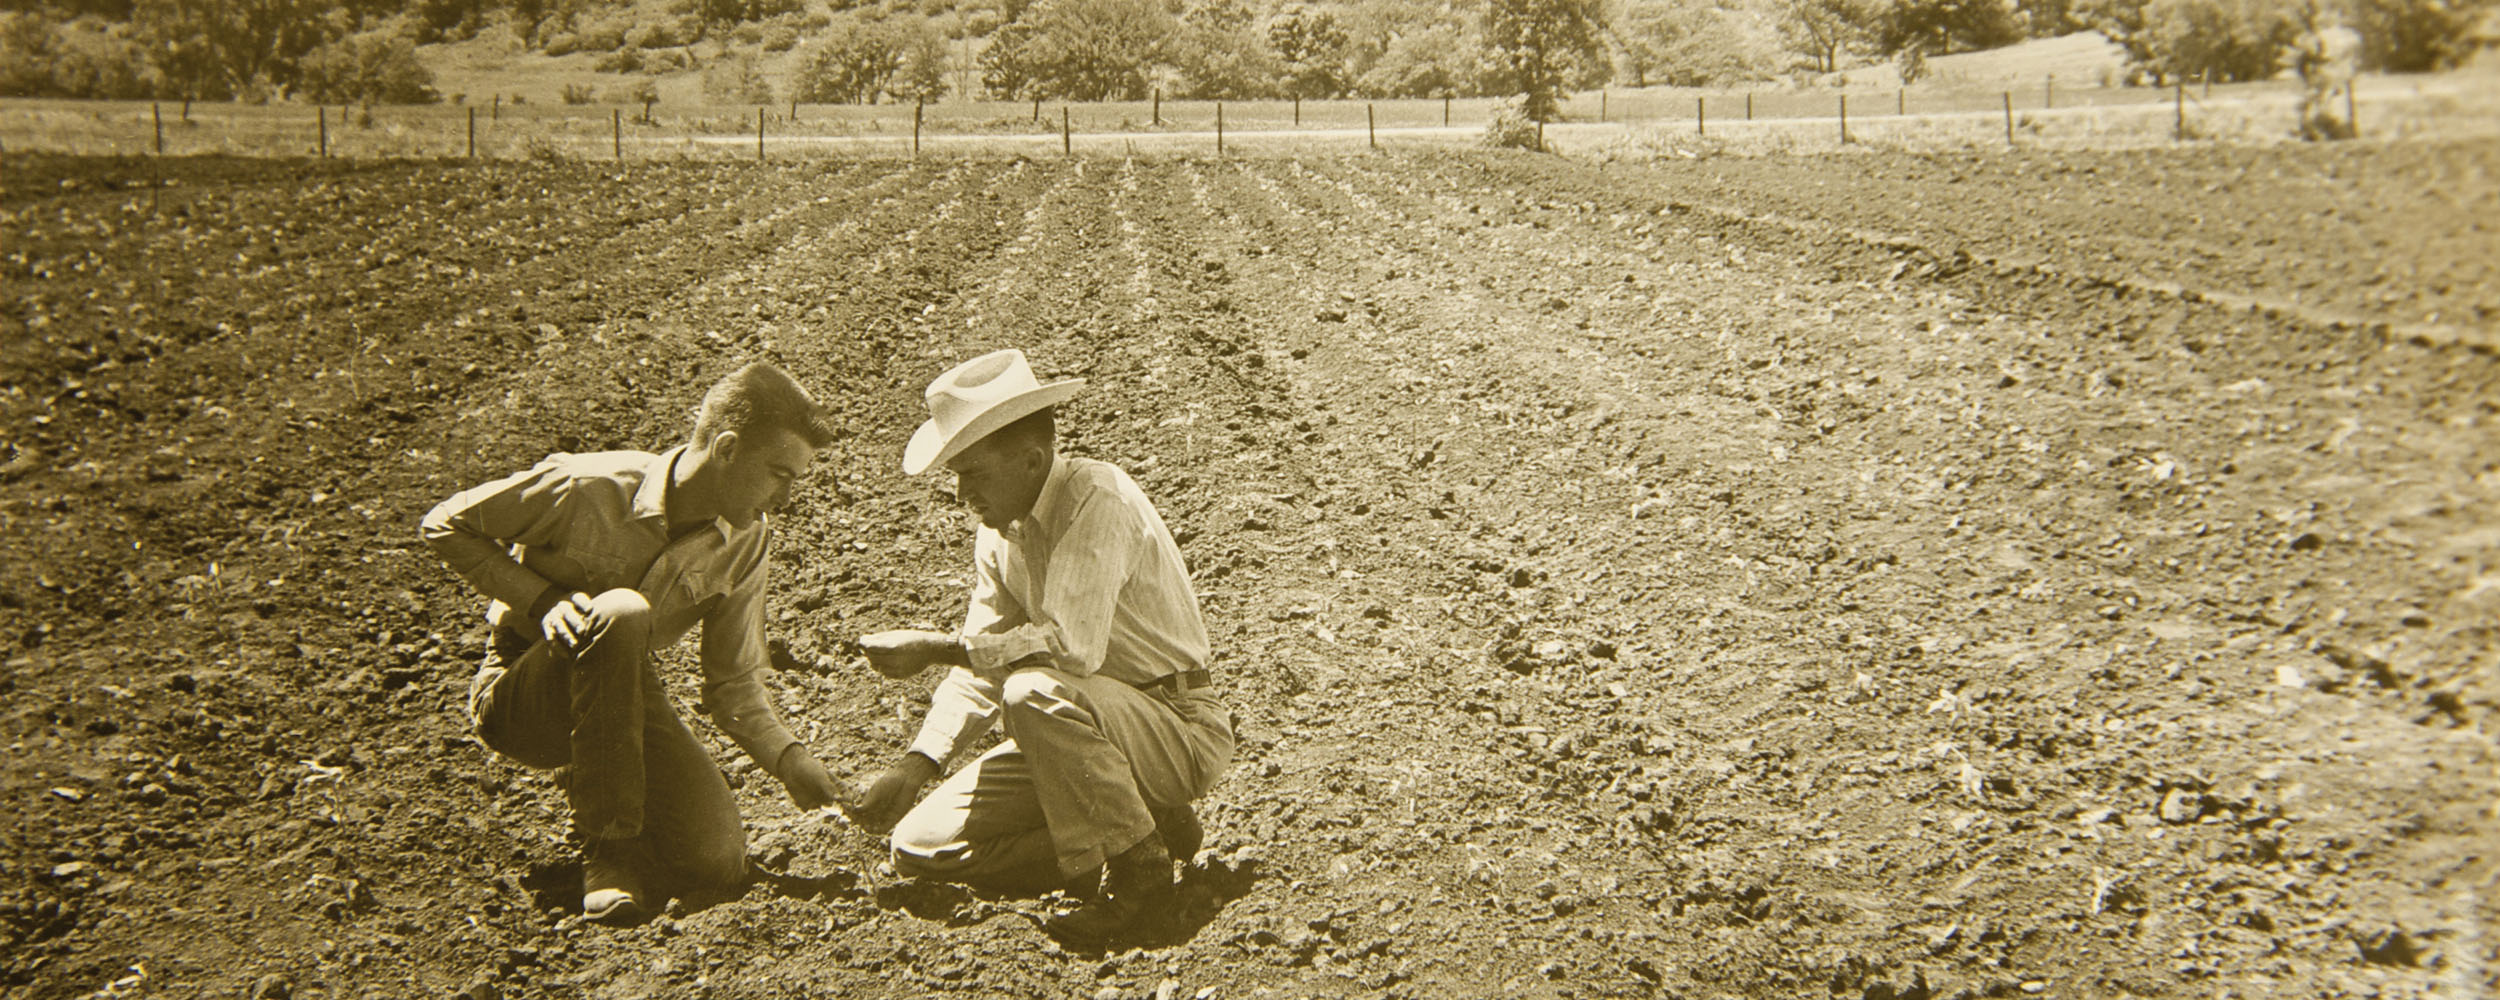 two men squat in a field to look at planted seed 